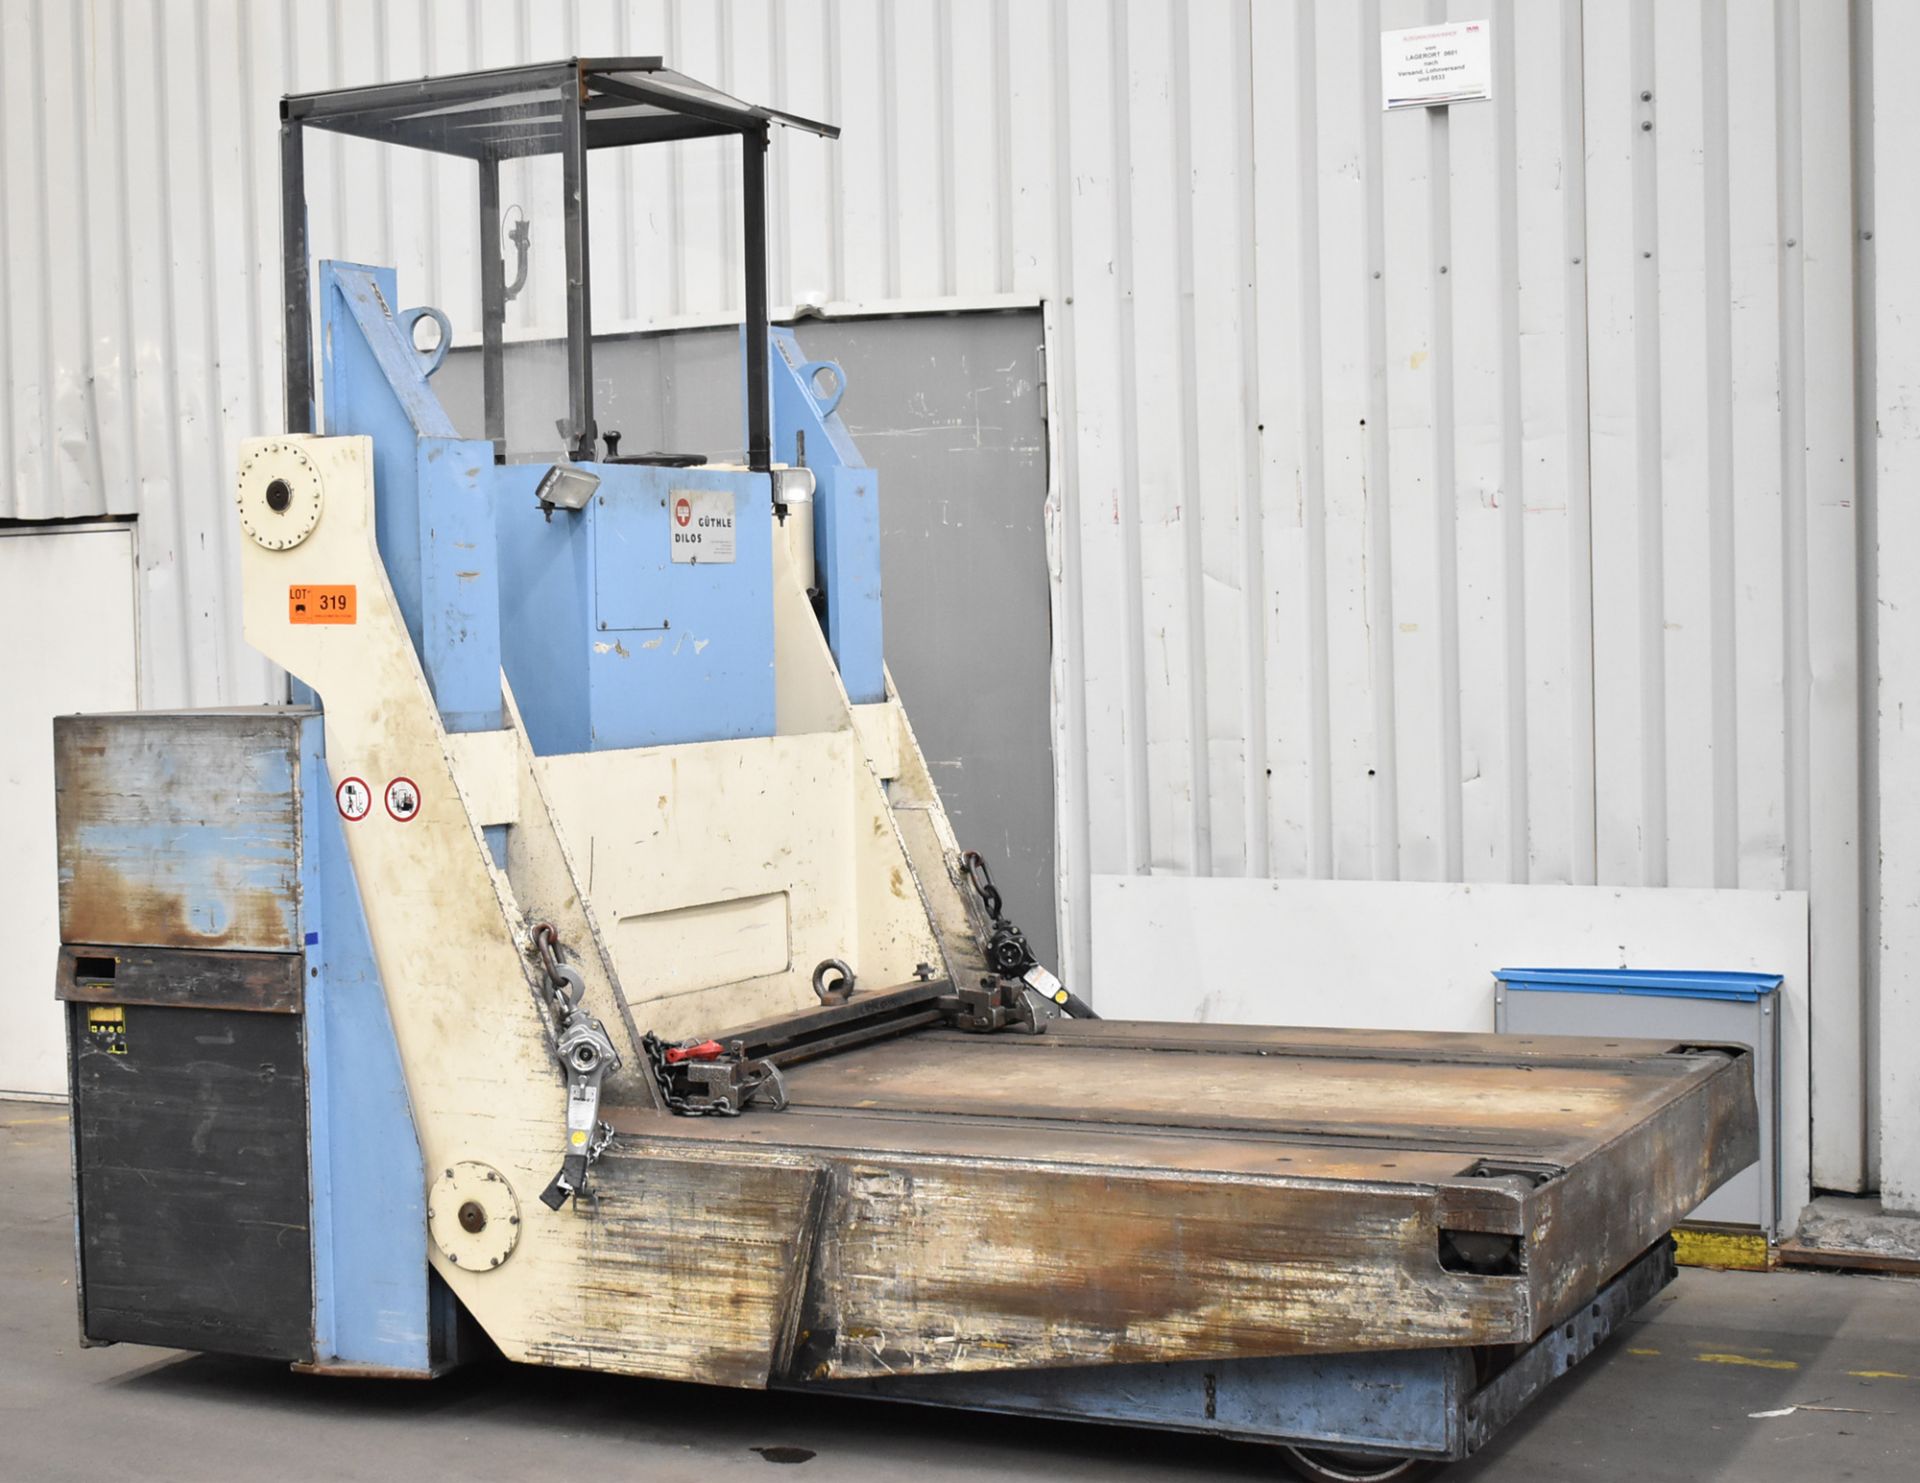 GUTHLE DILOS TAB EZWS 150/18/045 ELECTRIC DIE HANDLER WITH 15000 KG PAYLOAD CAPACITY, 1100 MM REACH,